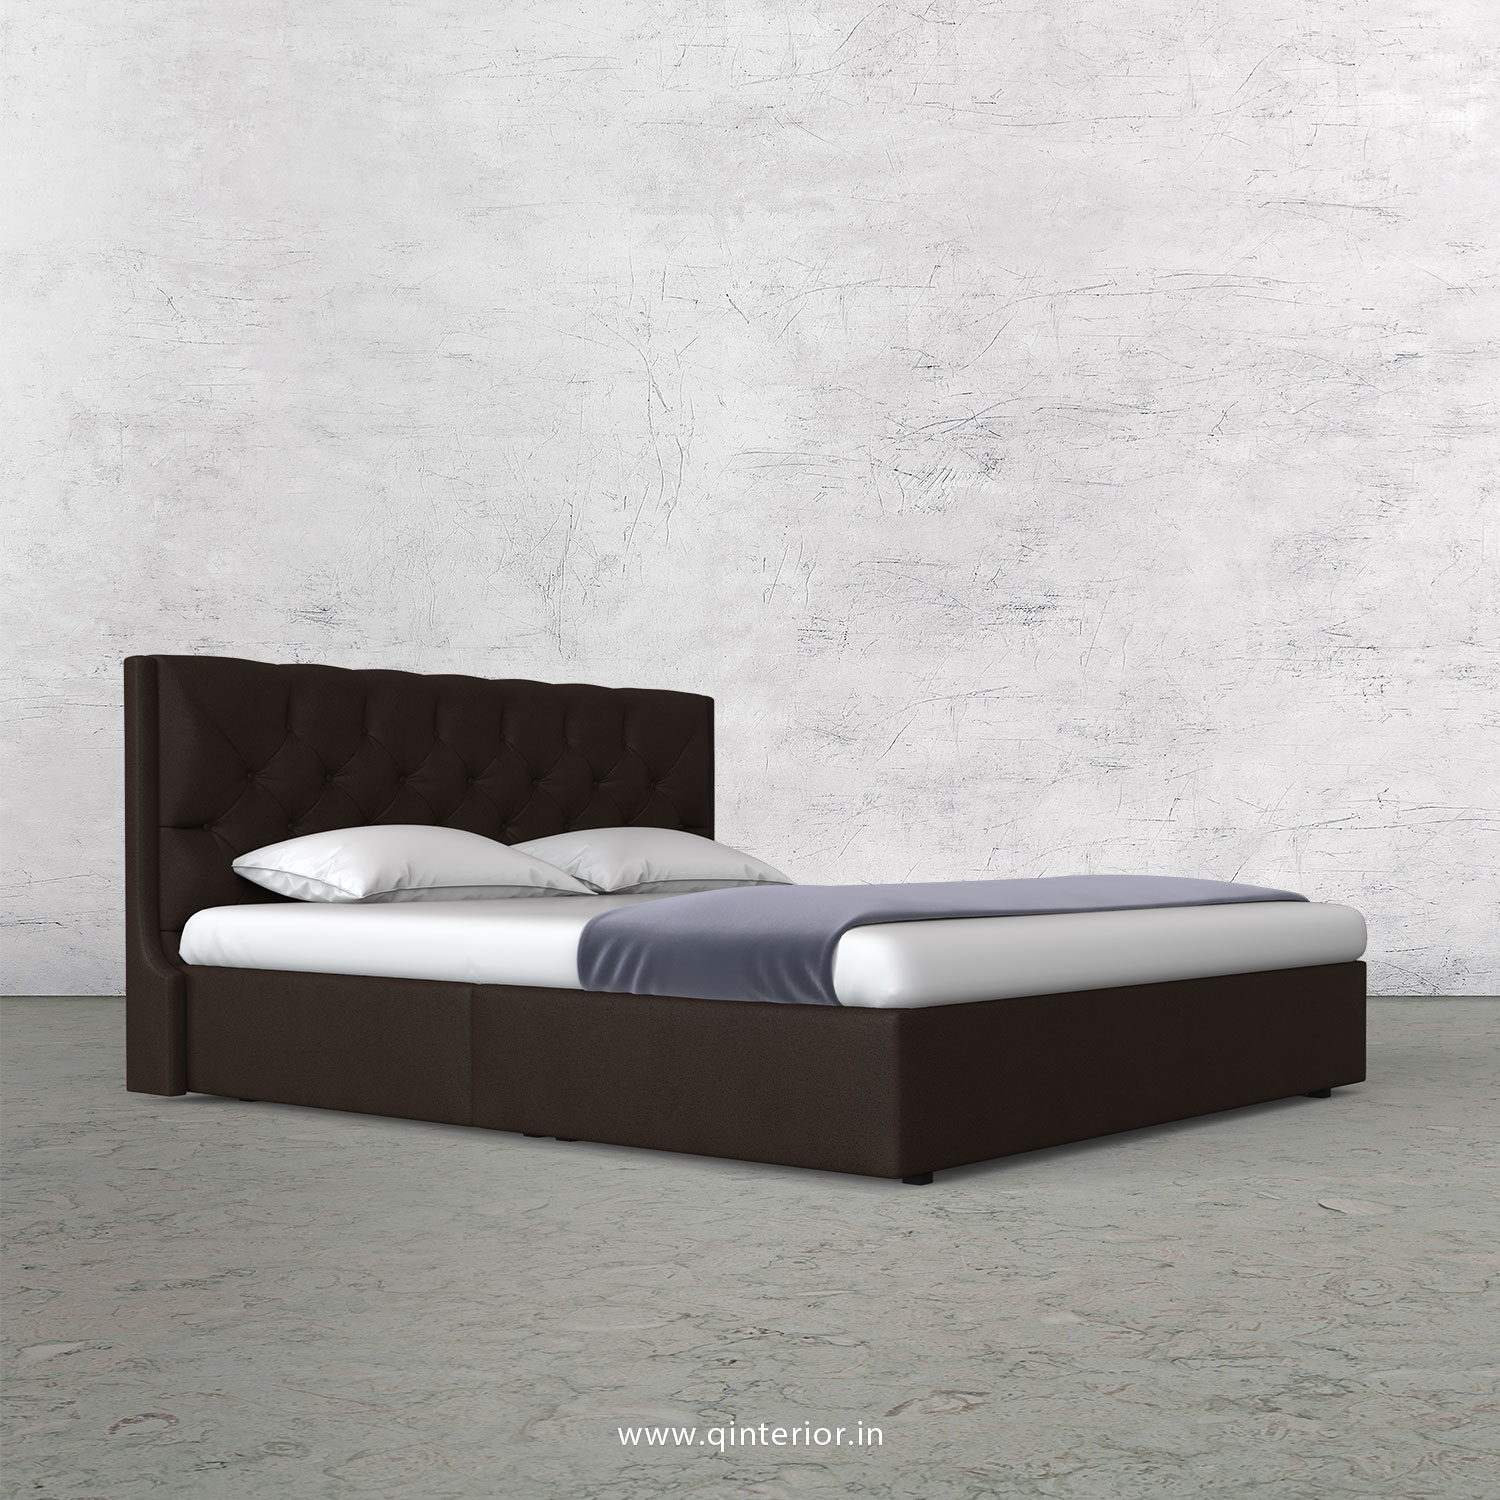 Scorpius King Size Bed in Fab Leather Fabric - KBD009 FL16